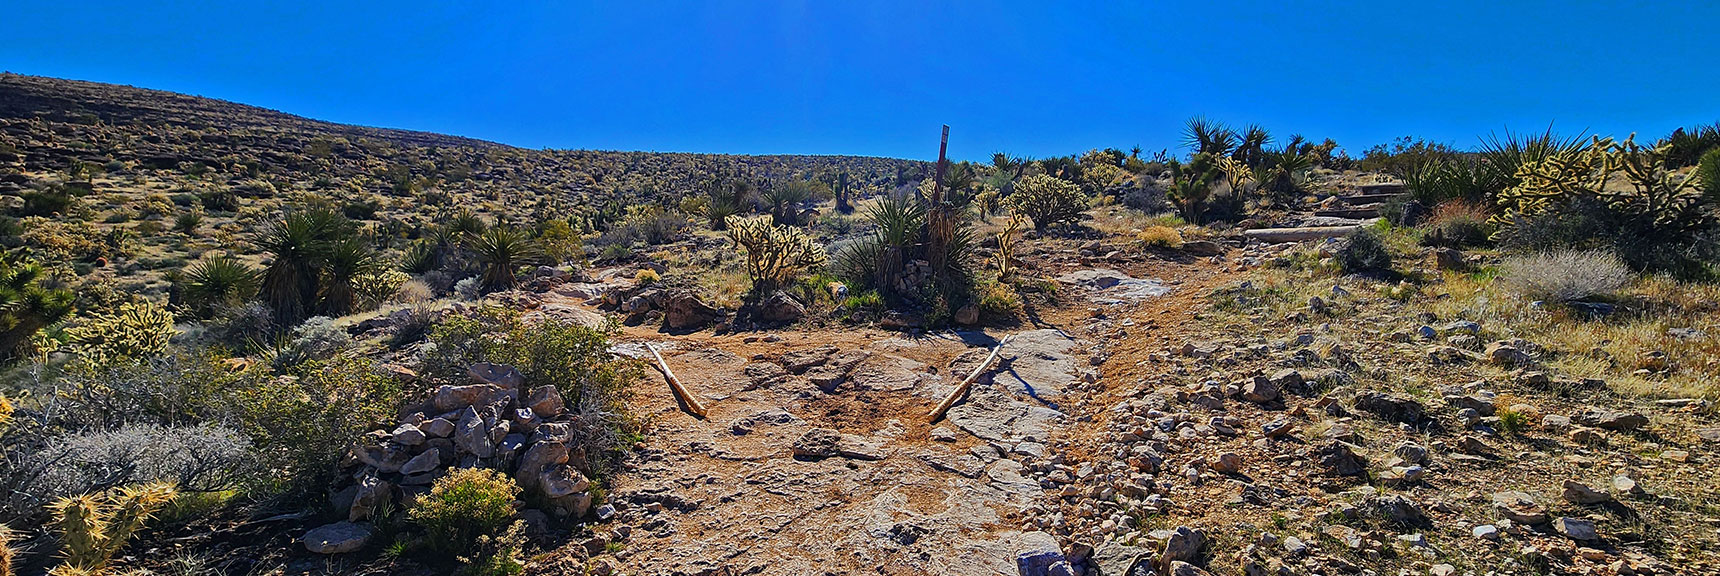 Take Fossil Canyon Trail (left split) About Half Way Up Ridge. Fossil Ridge Trail Continues (right). | Fossil Canyon | Cowboy Canyon | Blue Diamond Hill, Nevada